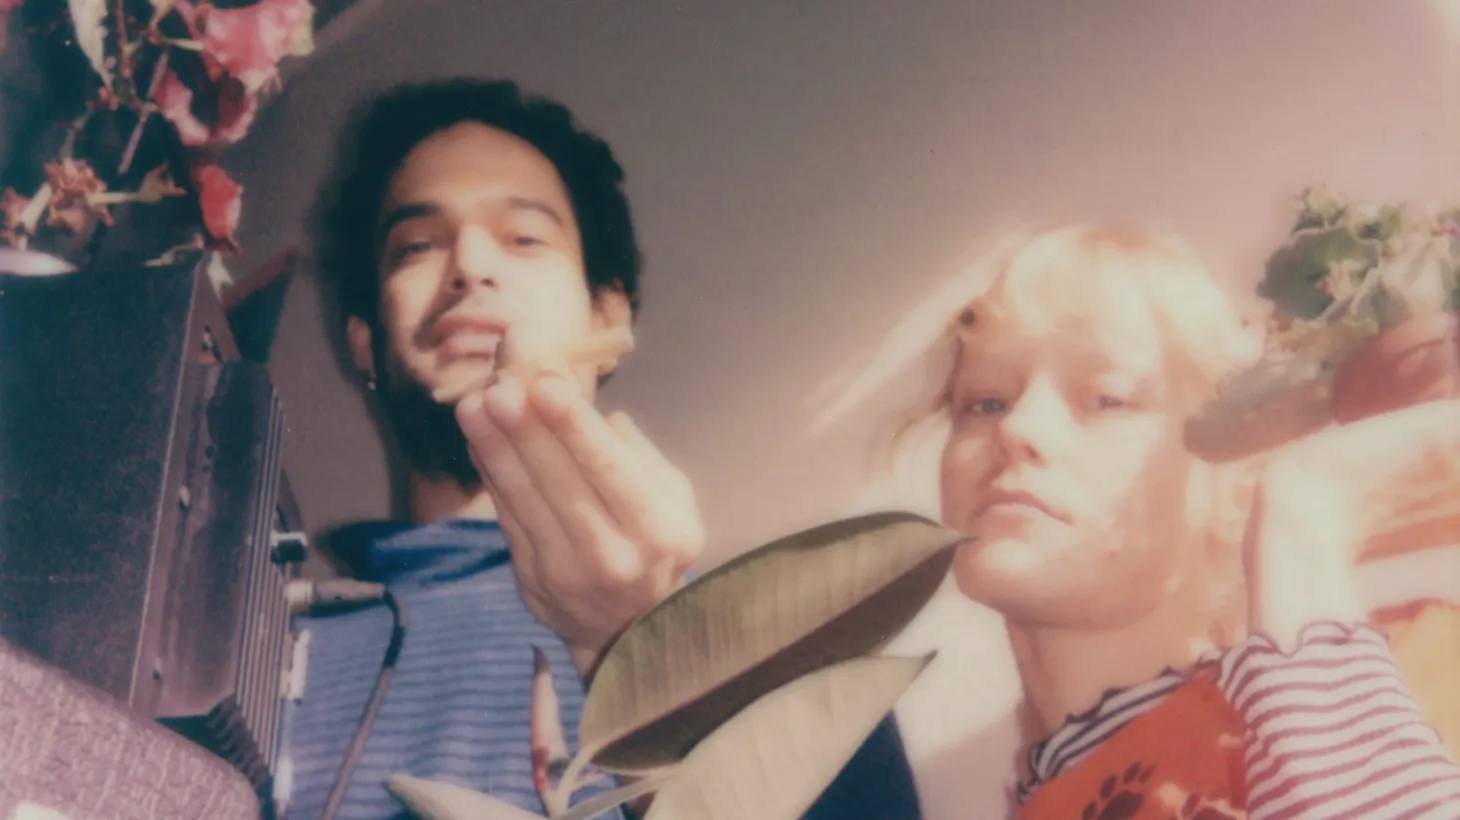 Best friends and bandmates Ziv and Alice, known as the duo strongboi, released three songs created in a Berlin living room in 2020, laying the groundwork for a polished debut album.